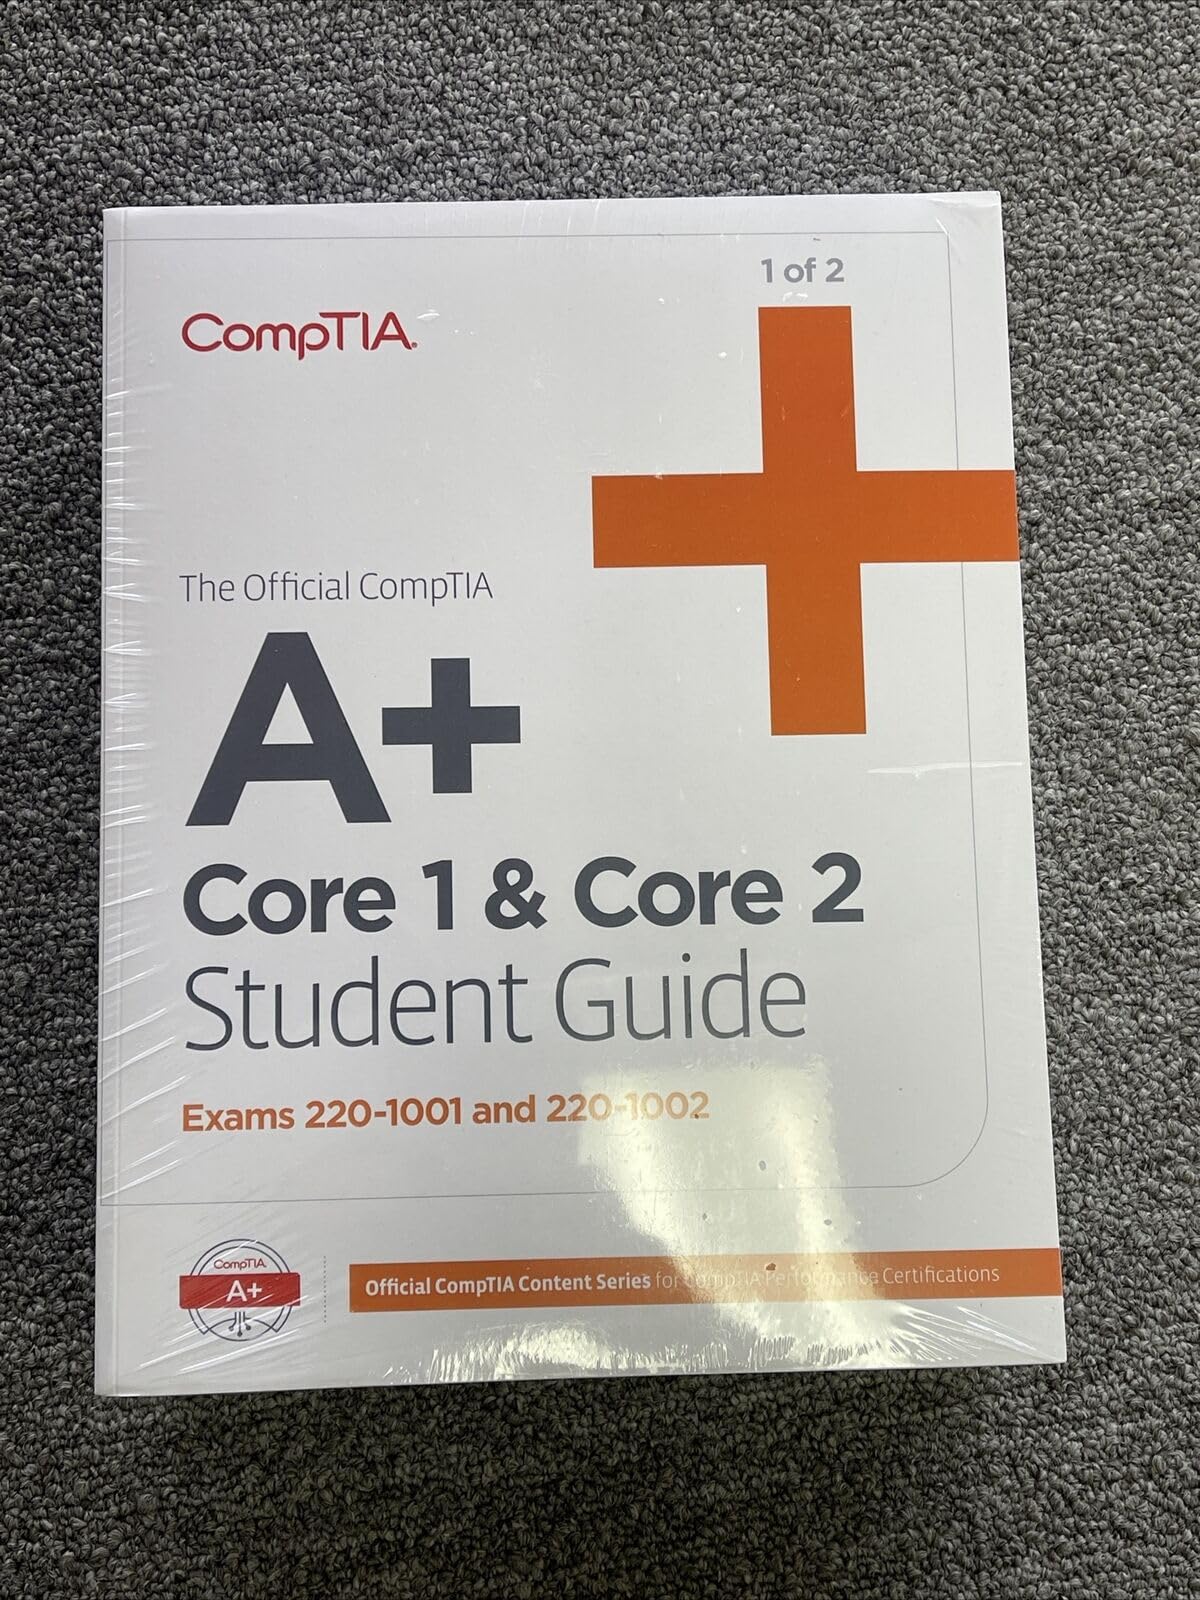 CompTIA A+ Complete Study Guide: Exam Core 1 220-1001 and Exam Core 2 220-1002